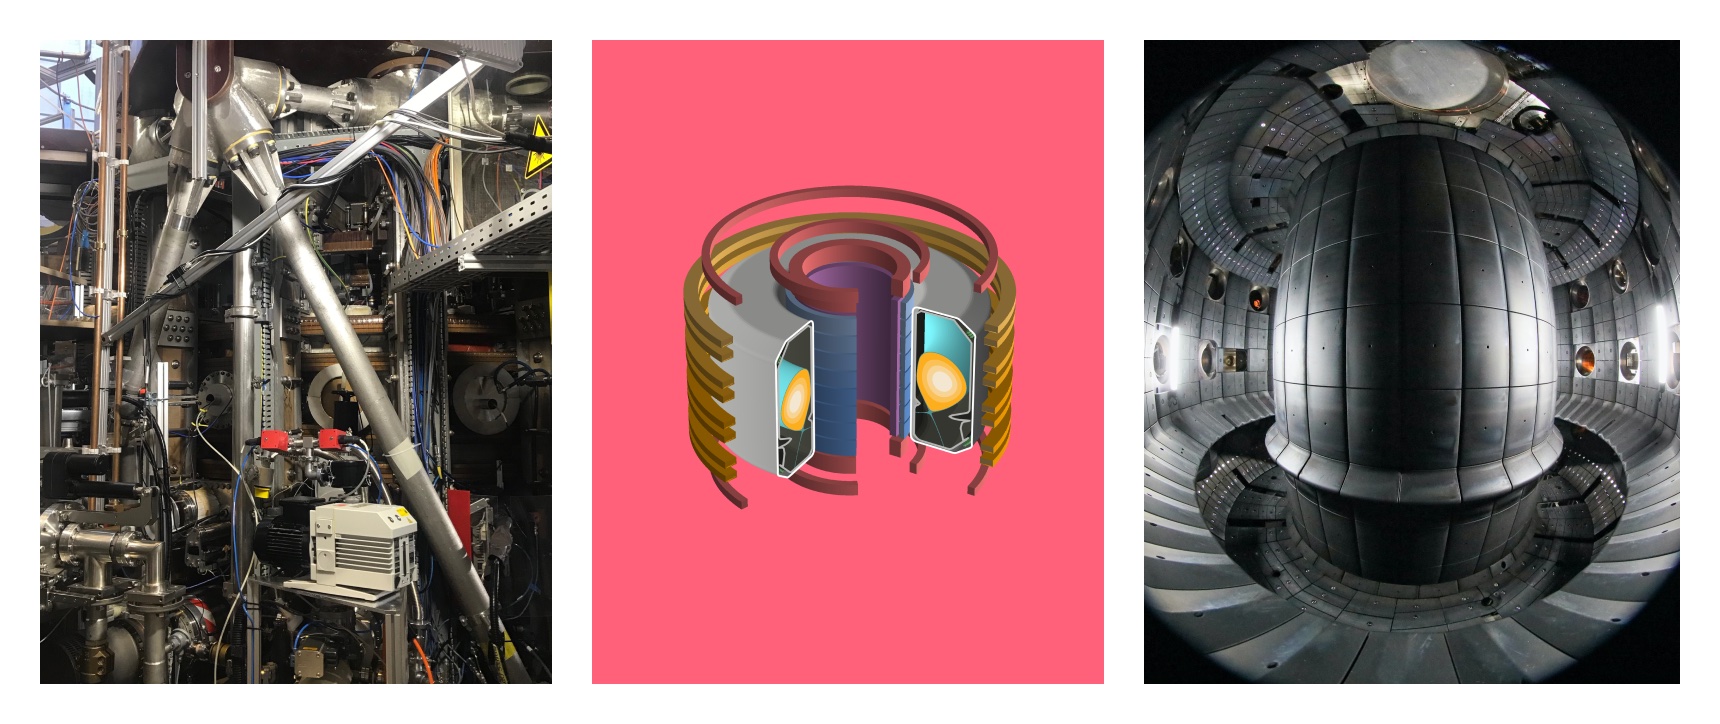 Images of the tokamak machine and a 3D model of it.